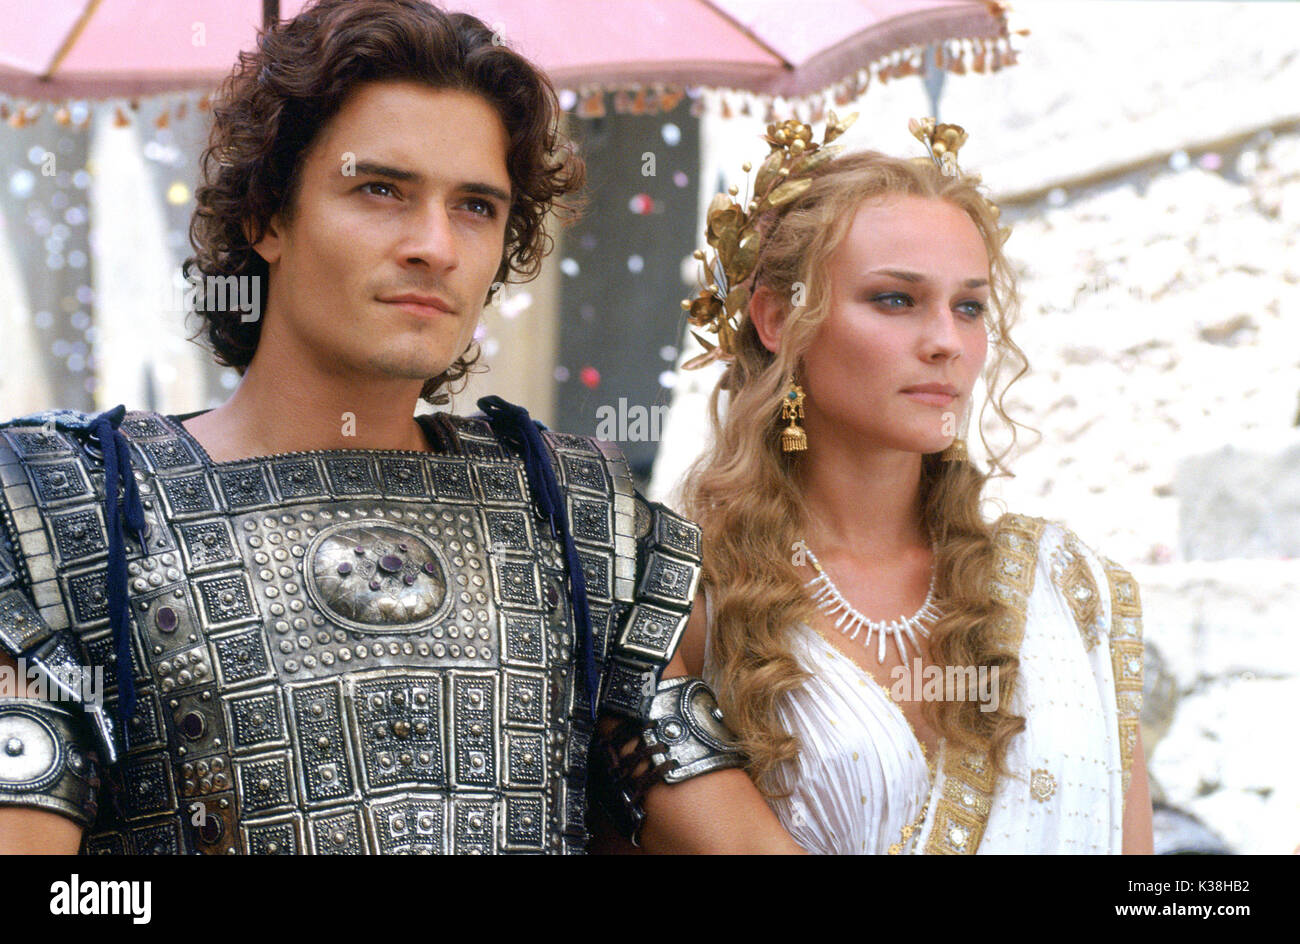 ORLANDO BLOOM as 'Paris' and DIANE KRUGER as 'Helen' in Warner Bros. Pictures' epic action adventure Troy, also starring Brad Pitt and Eric Bana. PHOTOGRAPHS TO BE USED SOLELY FOR ADVERTISING, PROMOTION, PUBLICITY OR REVIEWS OF THIS SPECIFIC MOTION PICTURE AND TO REMAIN THE PROPERTY OF THE STUDIO. NOT FOR SALE OR REDISTRIBUTION.    TROY [US 2004]  ORLANDO BLOOM as 'Paris' and DIANE KRUGER as 'Helen'  ORLANDO BLOOM as 'Paris' and DIANE KRUGER as 'Helen' in Warner Bros. Pictures' epic action adventure Troy, also starring Brad Pitt and Eric Bana. PHOTOGRAPHS TO BE USED SOL Stock Photo